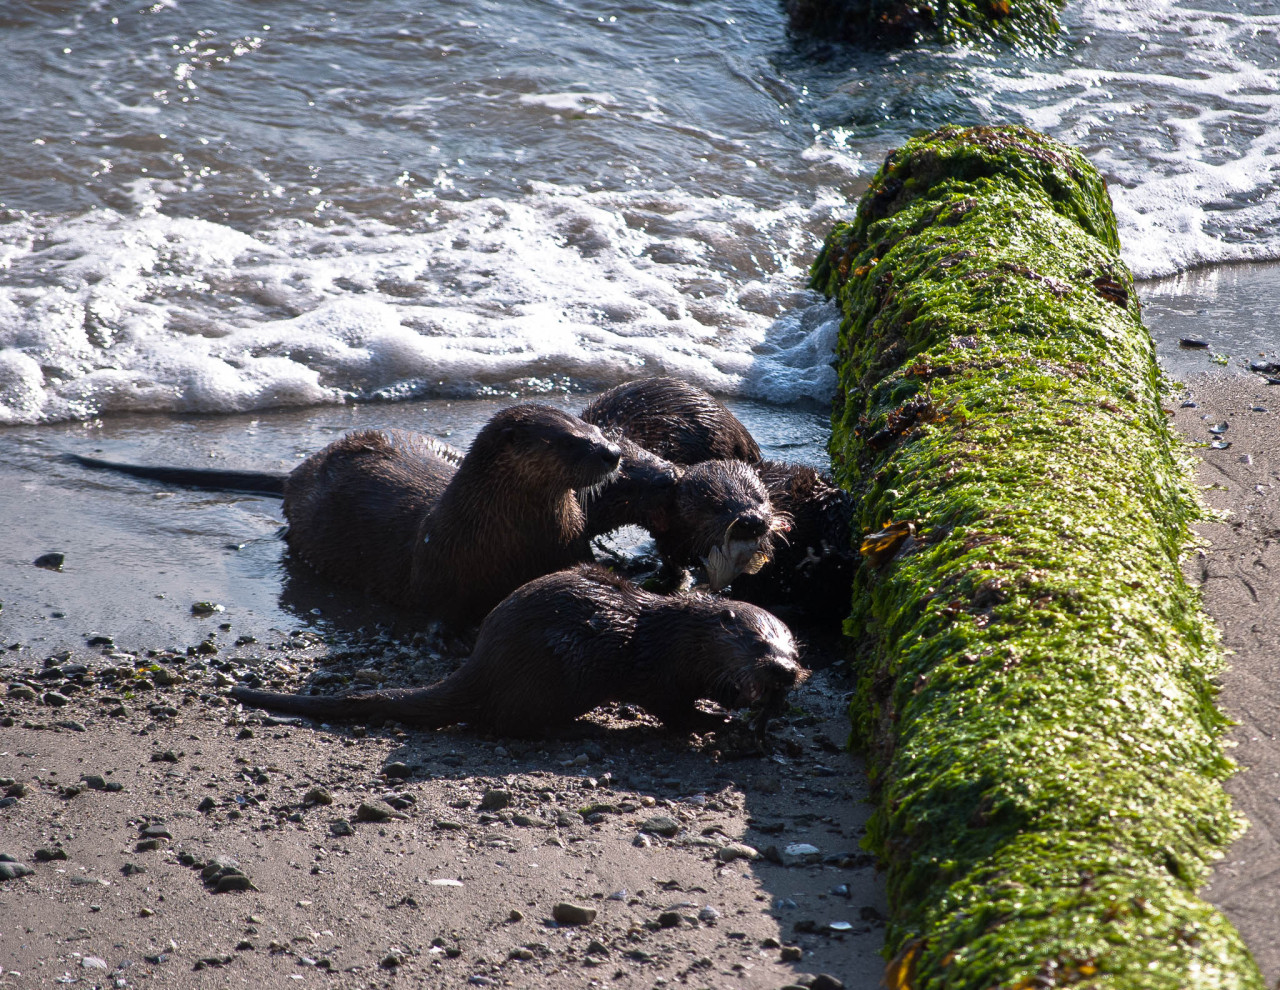 maggielovesotters:
“Wild otter mum and pups feeding - taken from the seawall in Stanley Park, Vancouver
”